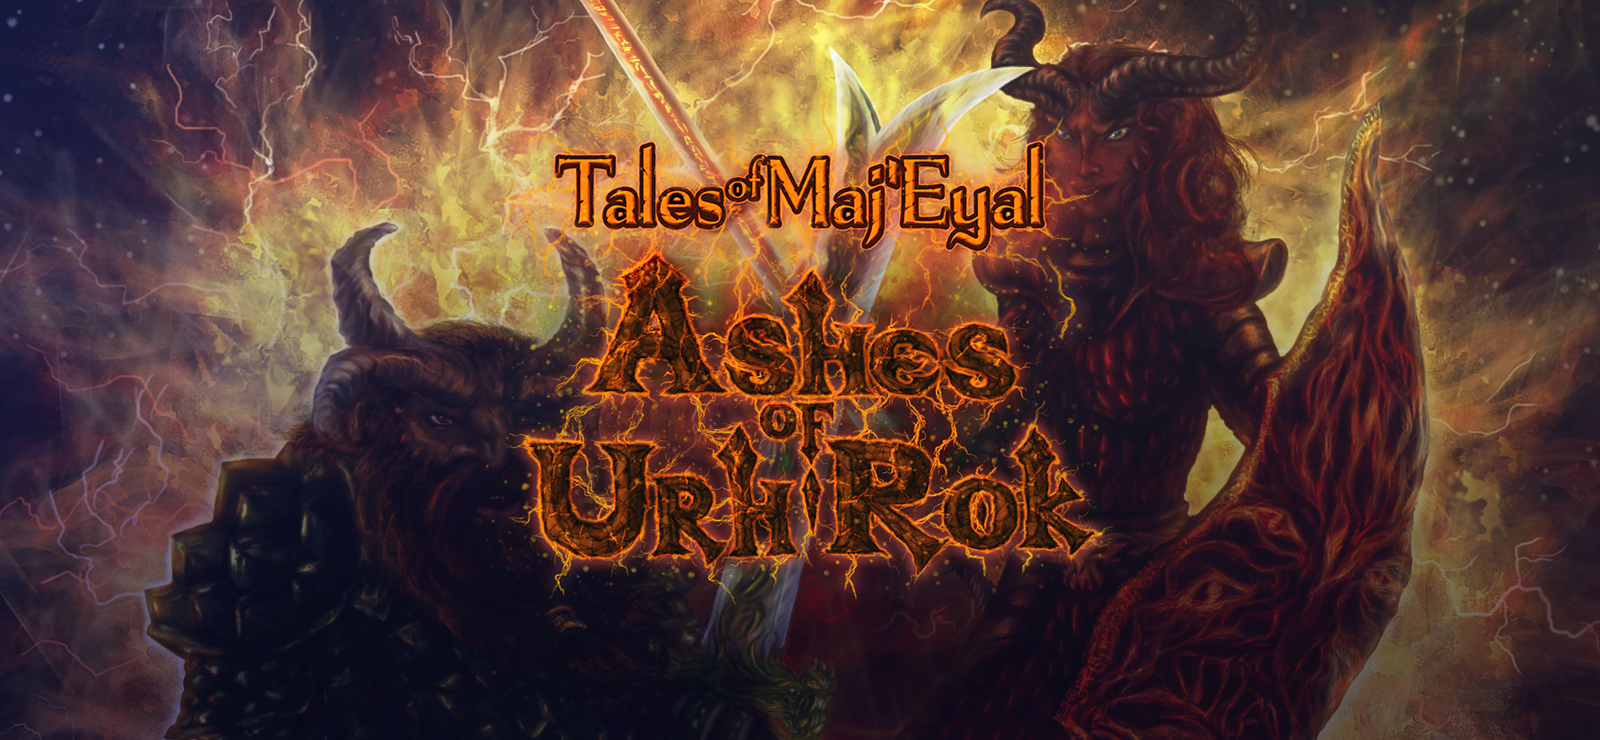 Tales Of Maj'Eyal: Ashes Of Urh'Rok